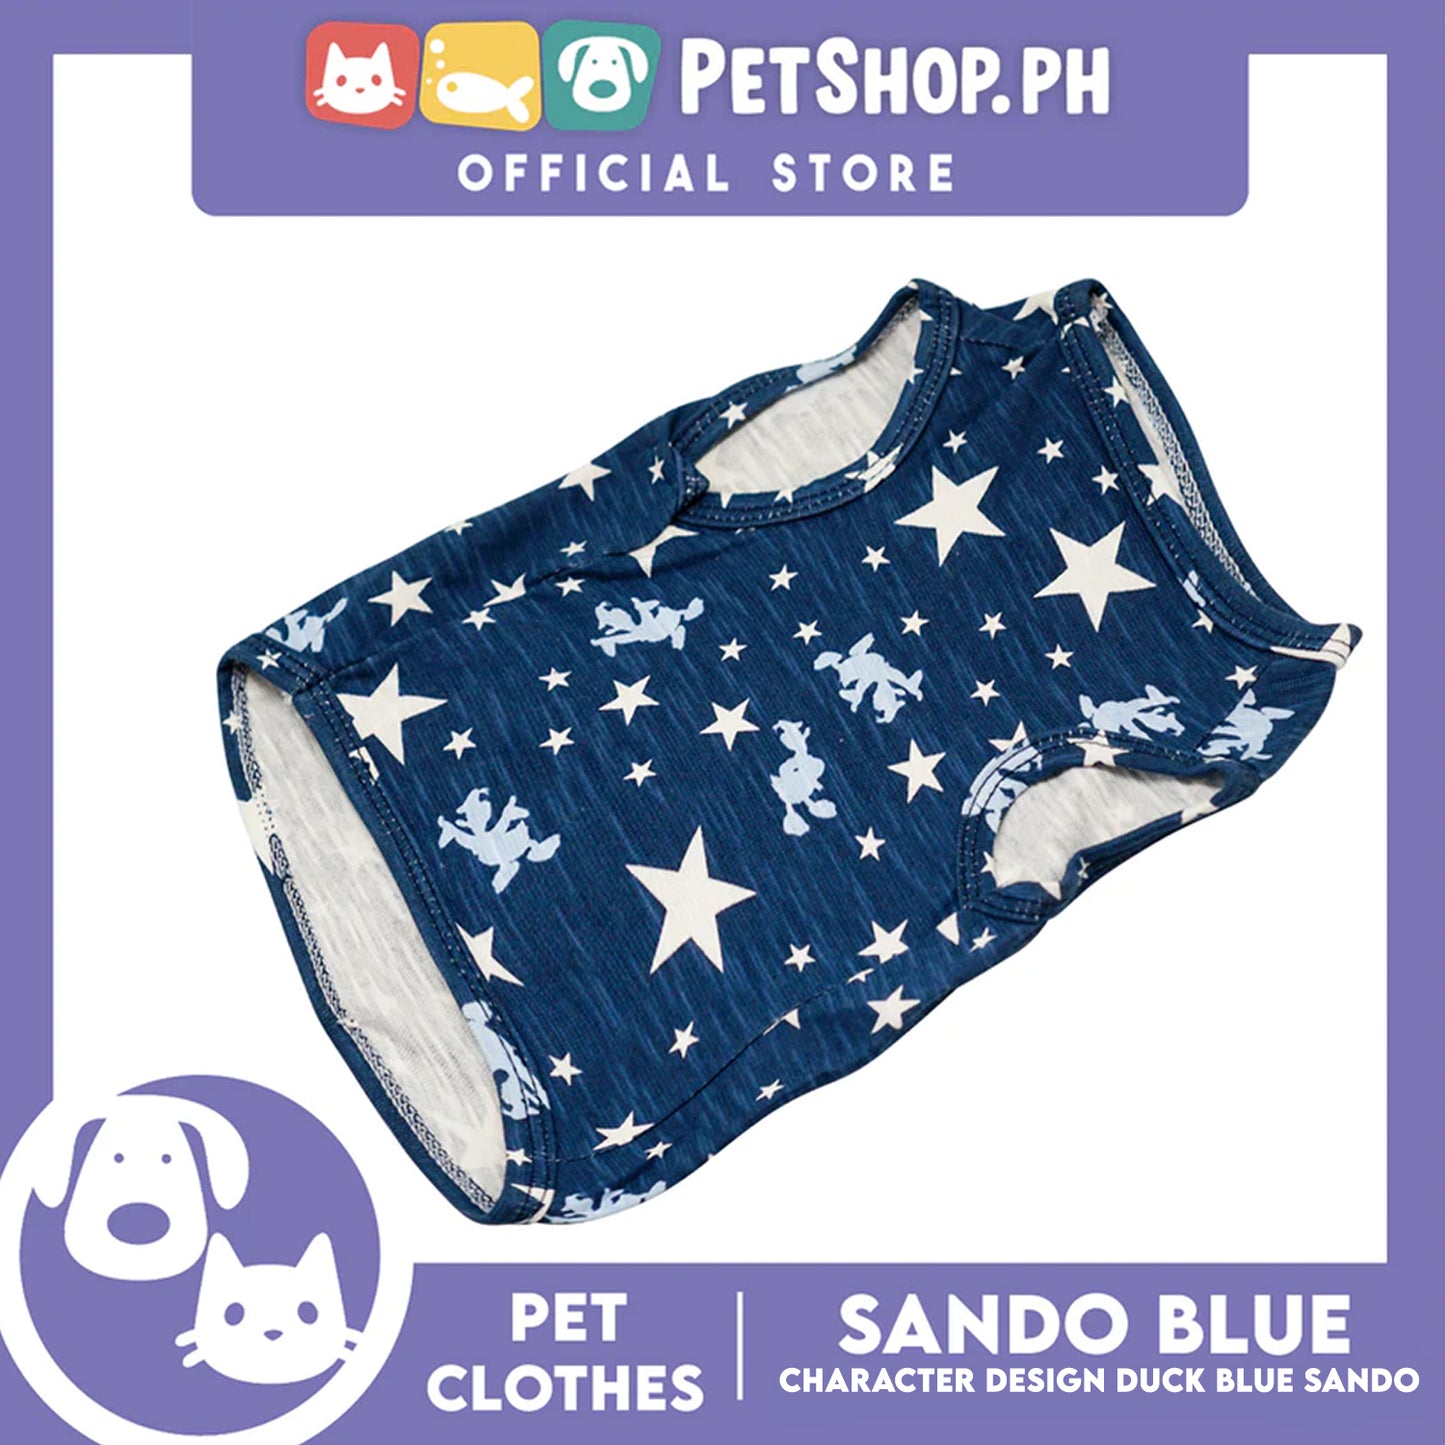 Pet Sando Duck Blue Sando (Extra Large) Pet Shirts Suitable for Dogs and Cats